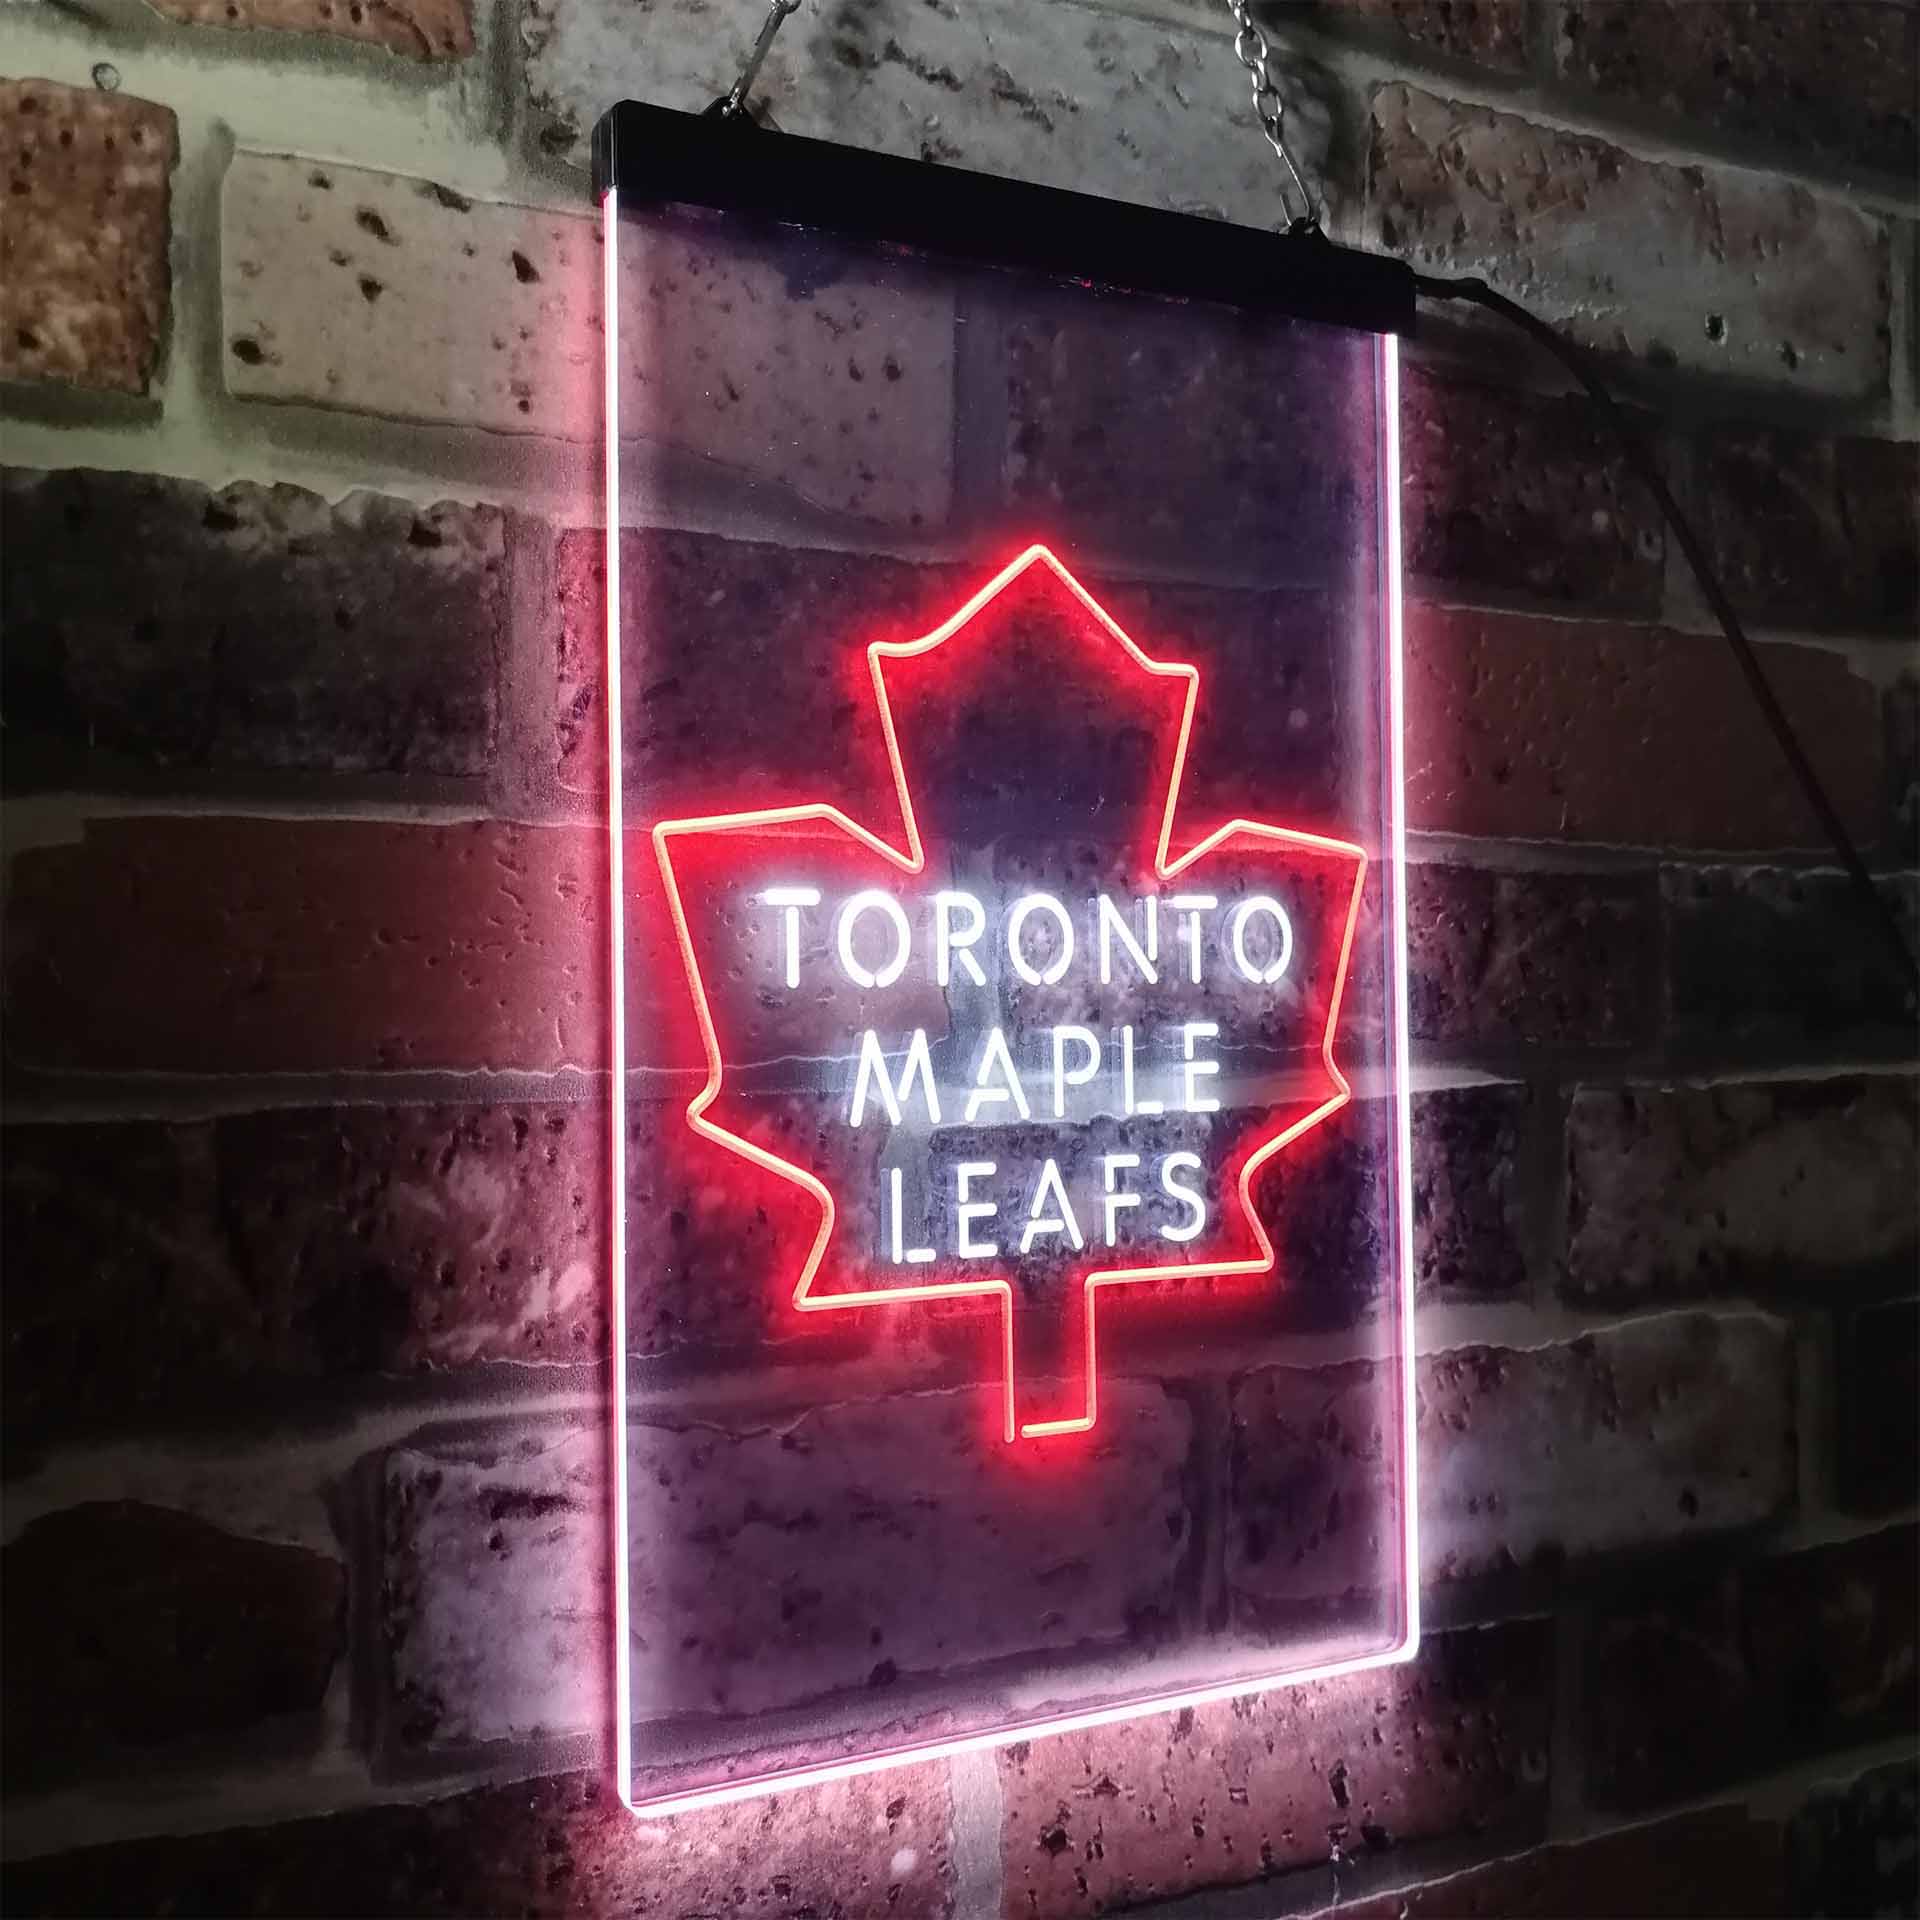 Toronto Maple Leafs LED Neon Sign